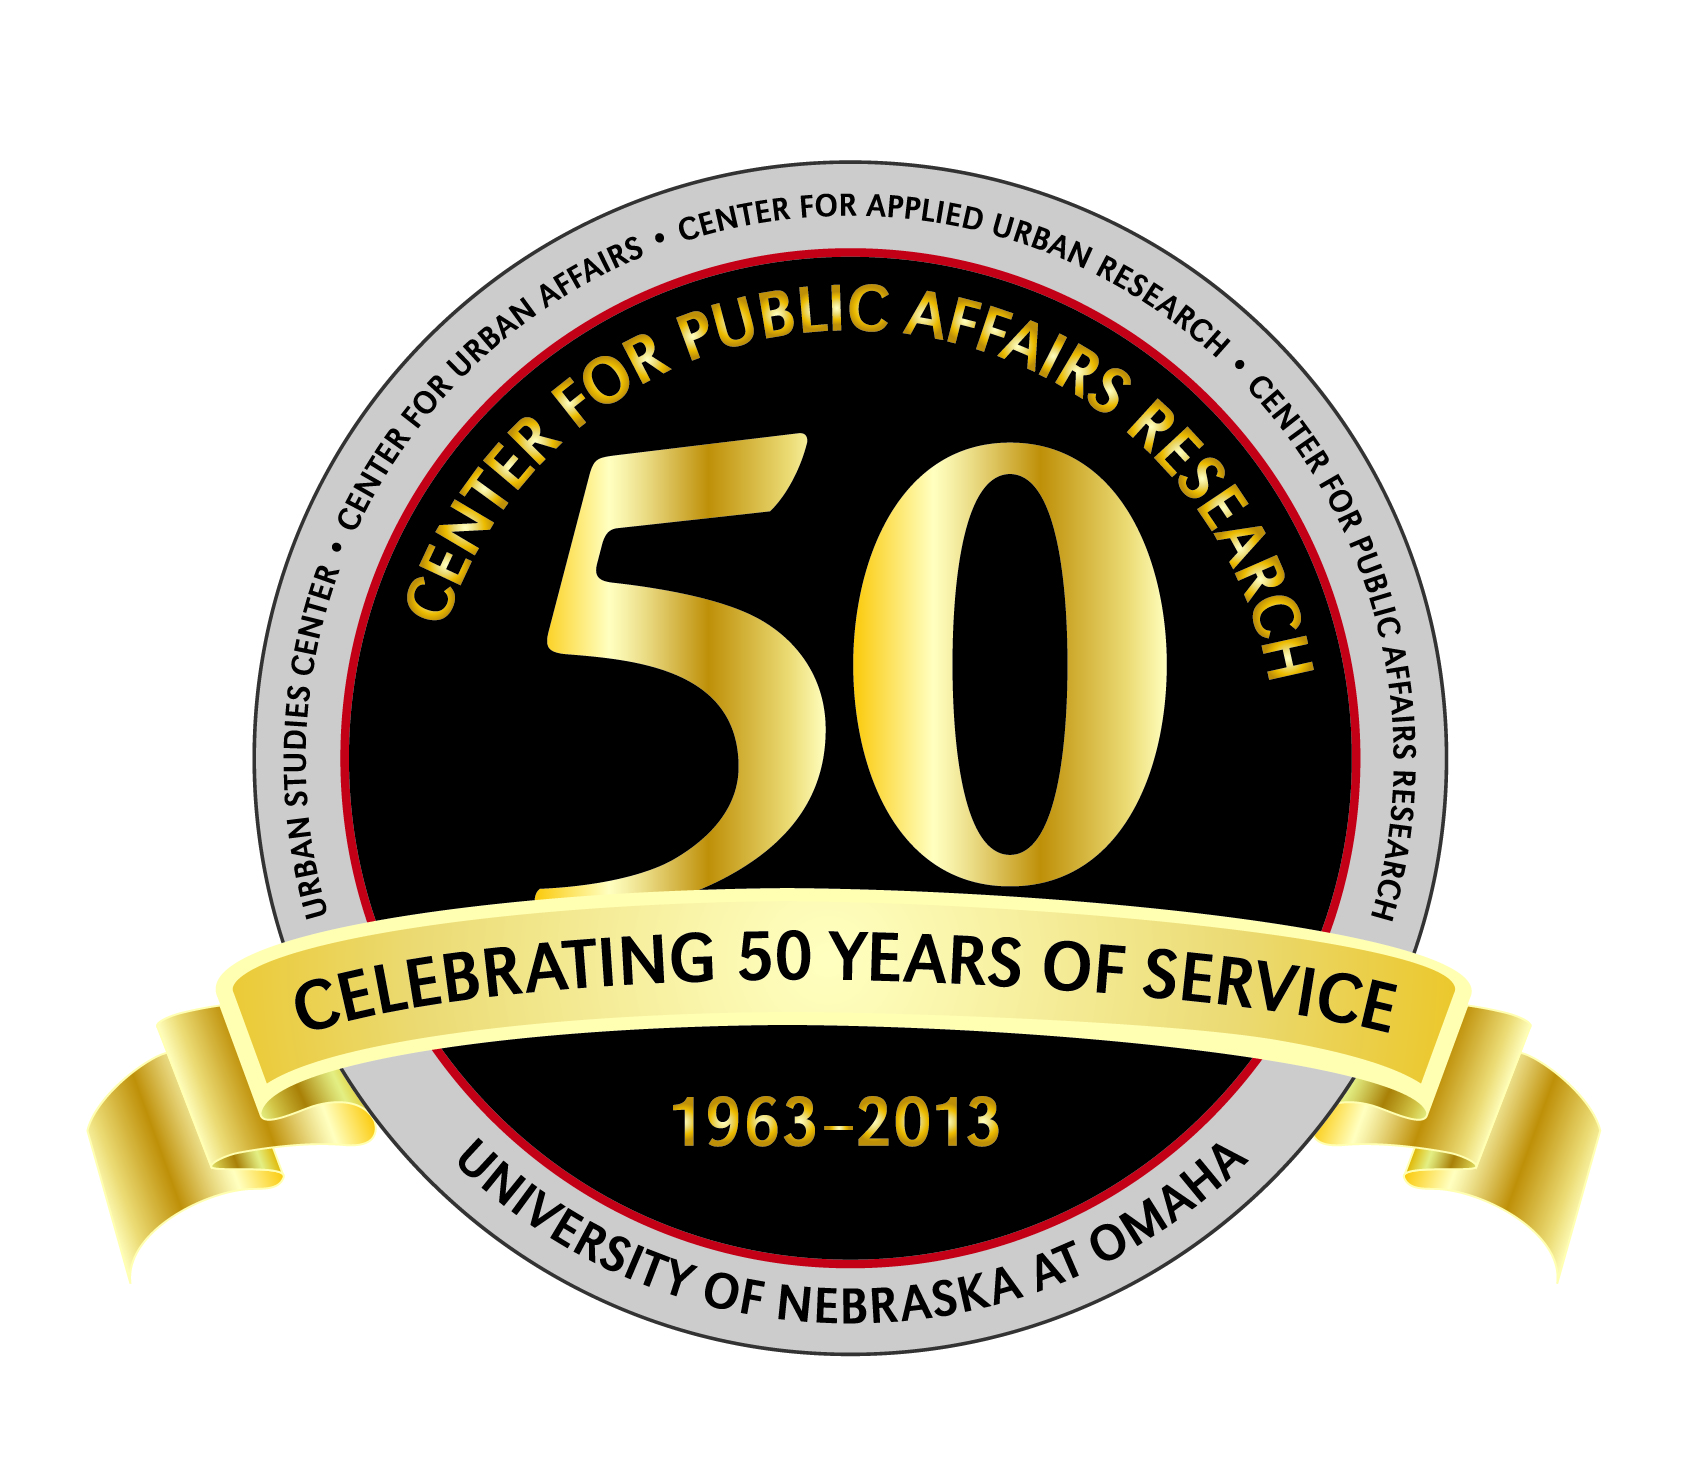 CPAR has provided over 50 years of service to the community. 